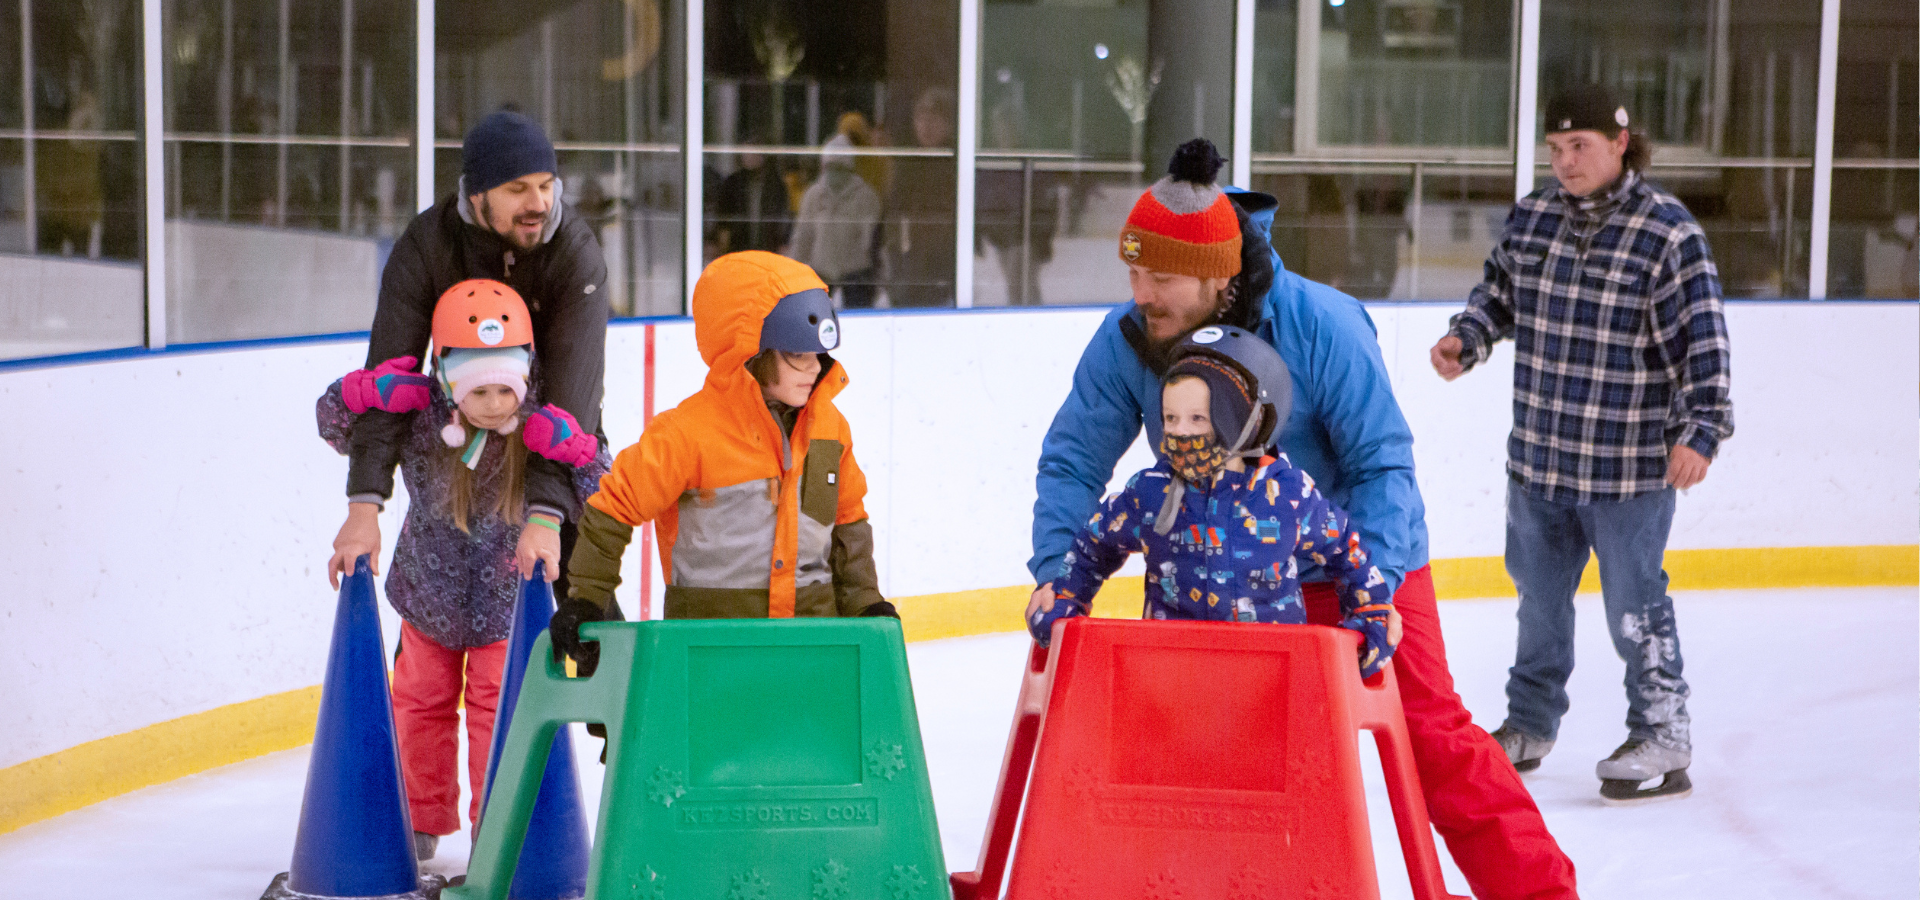 At the Pavilion, a group of children and adults use skate assisting items to make their way on the ice.